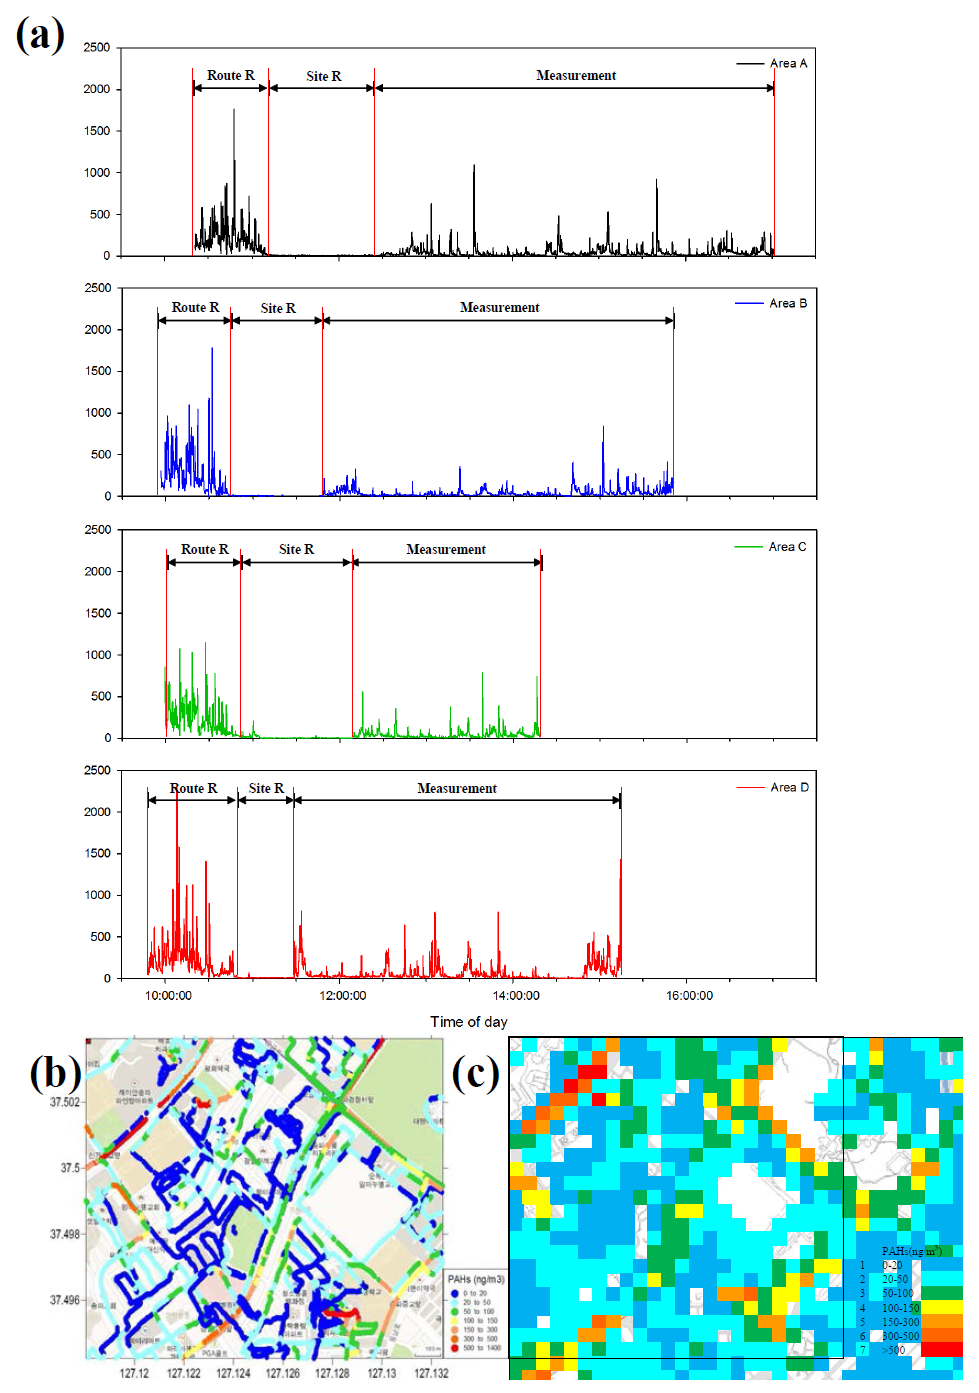 Data processing of a time-based primary analysis (a), a line map (b), and a spatial map (c) for particle-bound PAHs